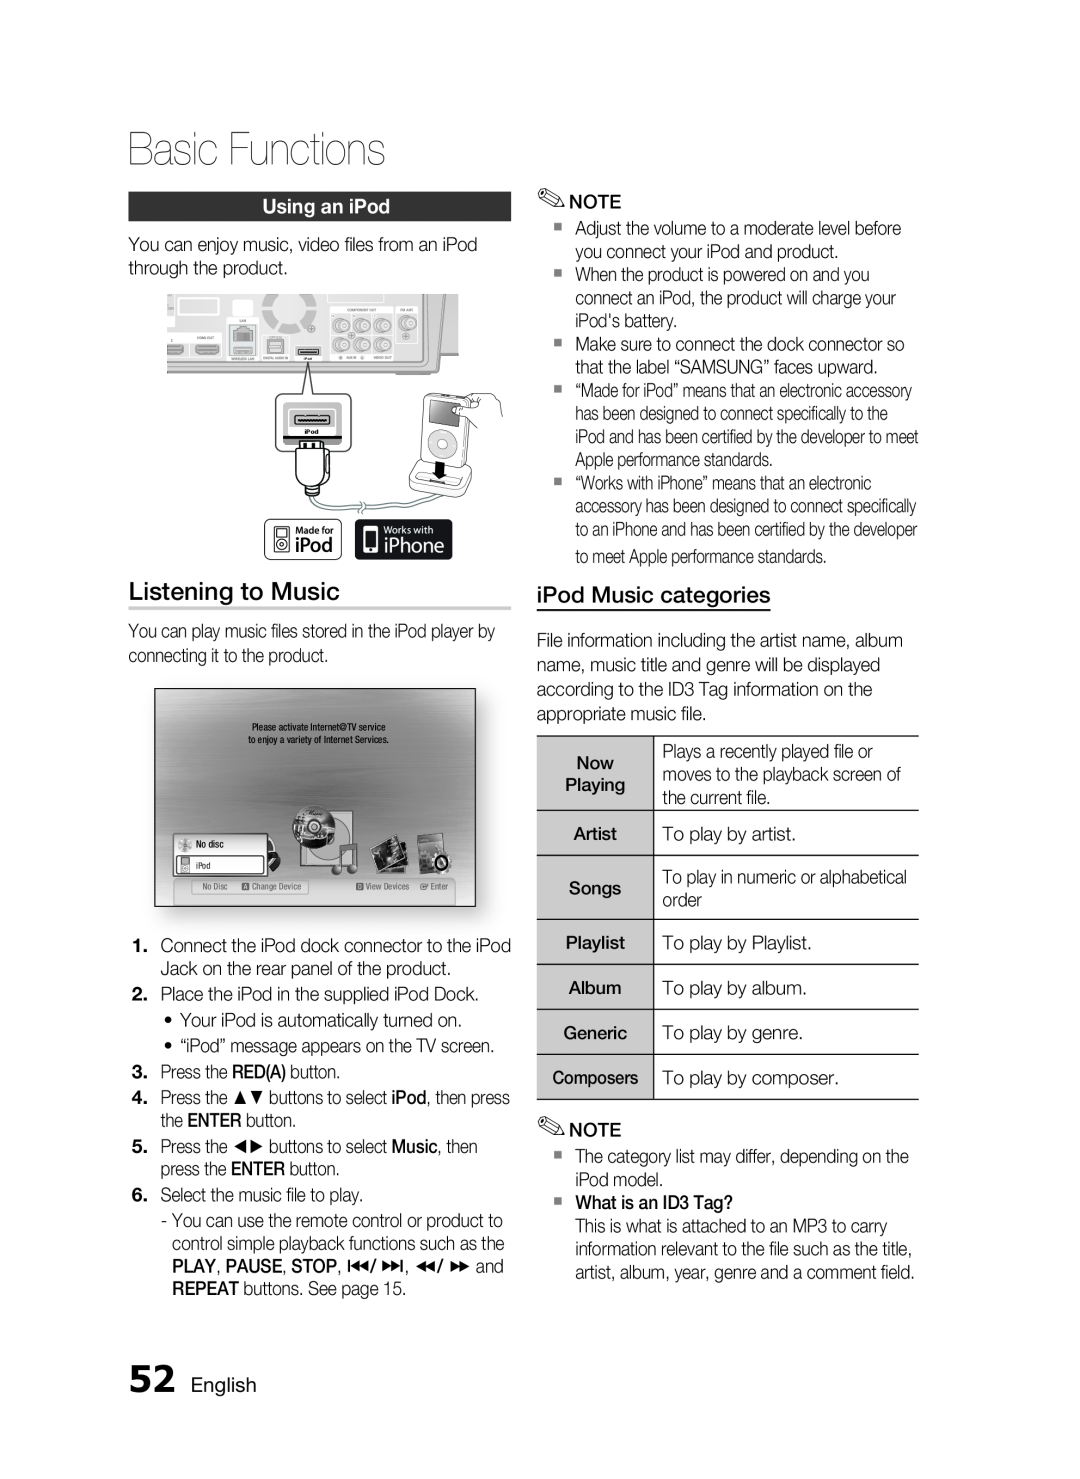 Samsung HT-C7300/XEN, HT-C7300/EDC manual Listening to Music, iPod Music categories, Using an iPod, English, Basic Functions 